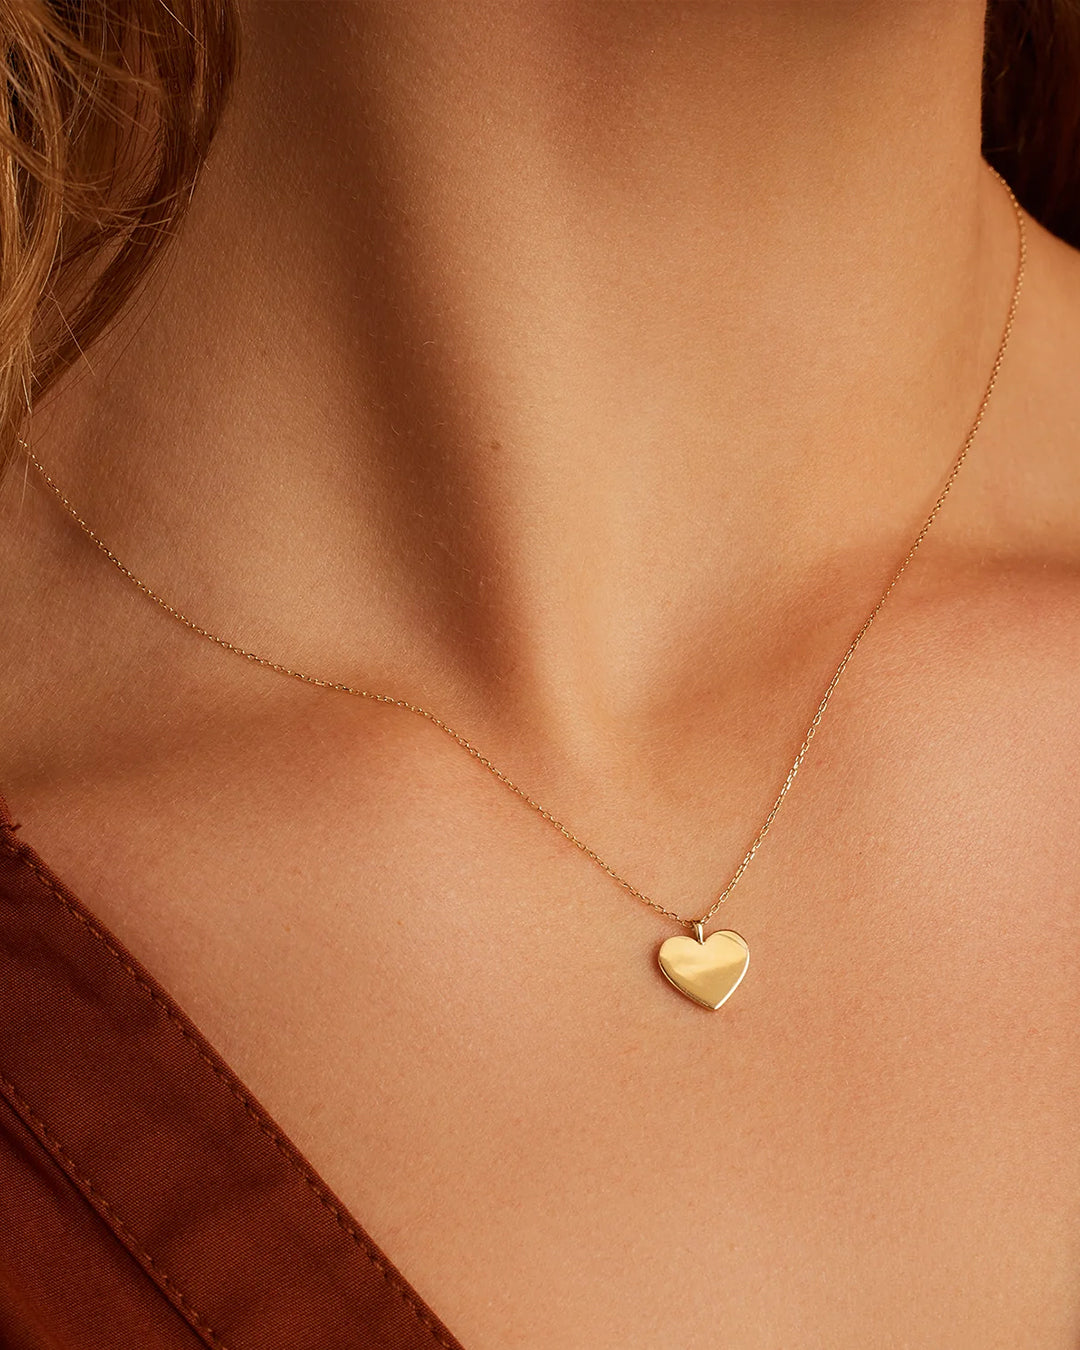 Ties of the Heart Necklace with Initials (Gold Plated) - Talisa